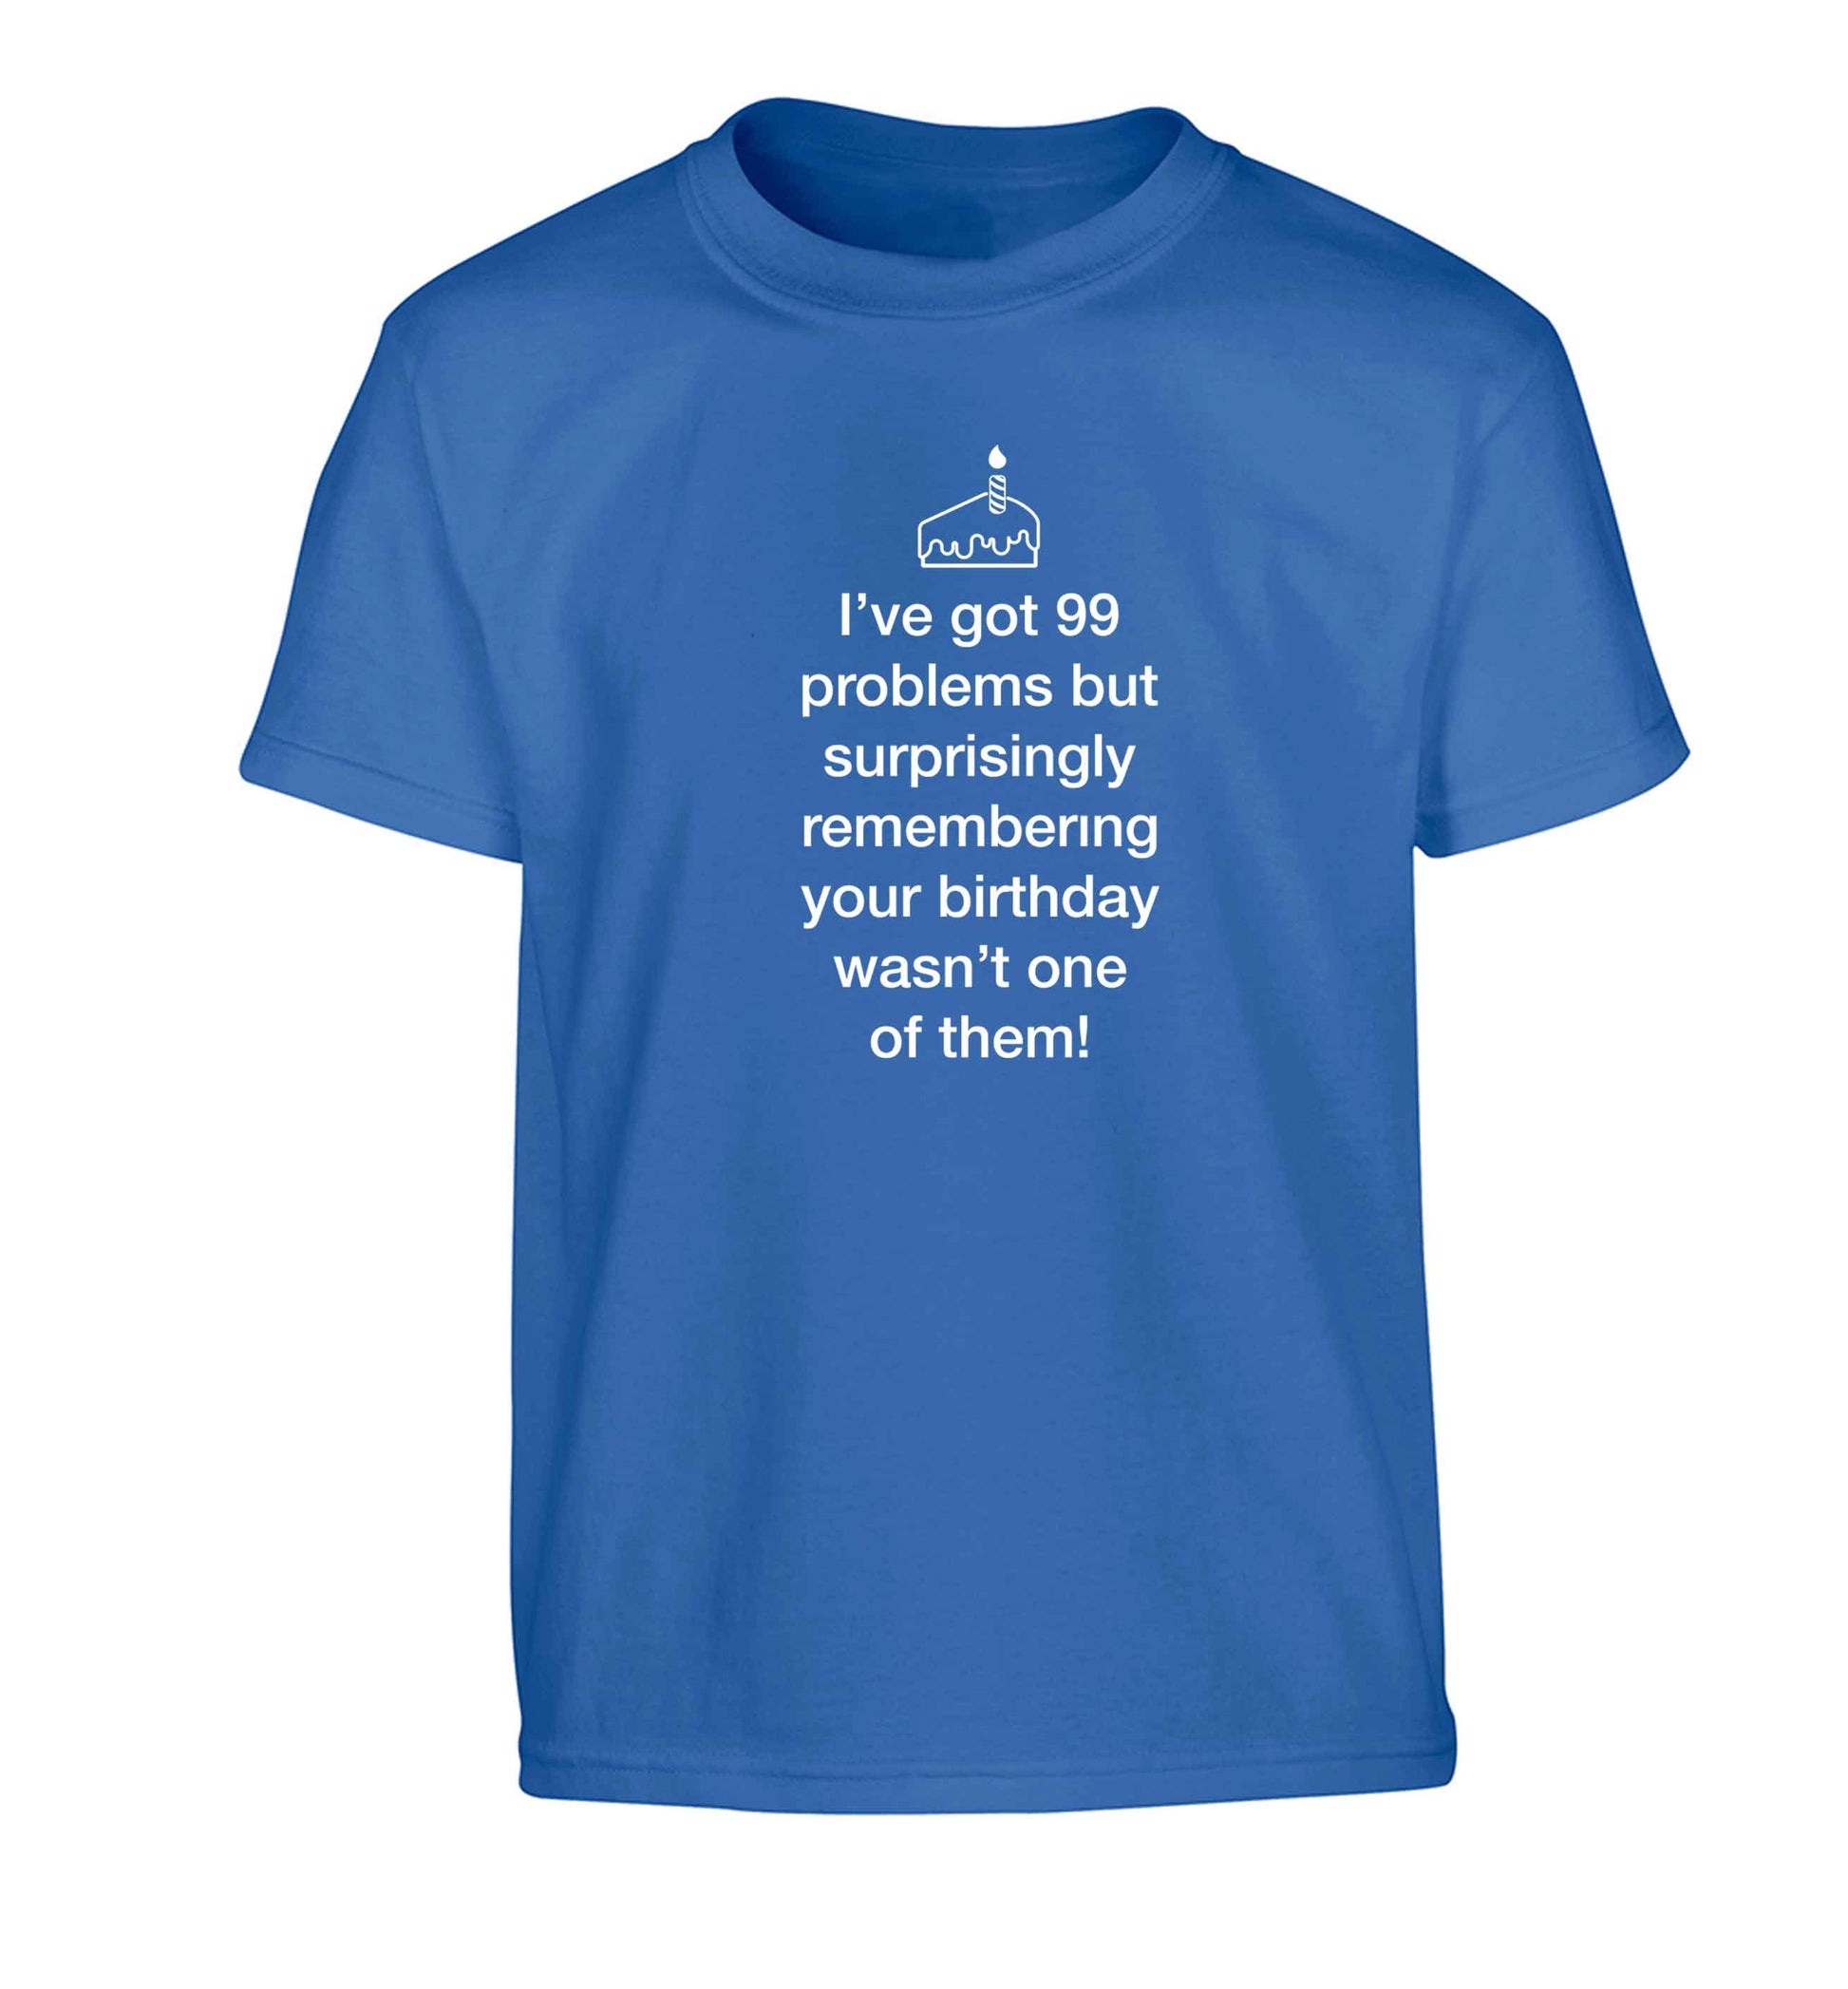 I've got 99 problems but surprisingly remembering your birthday wasn't one of them! Children's blue Tshirt 12-13 Years